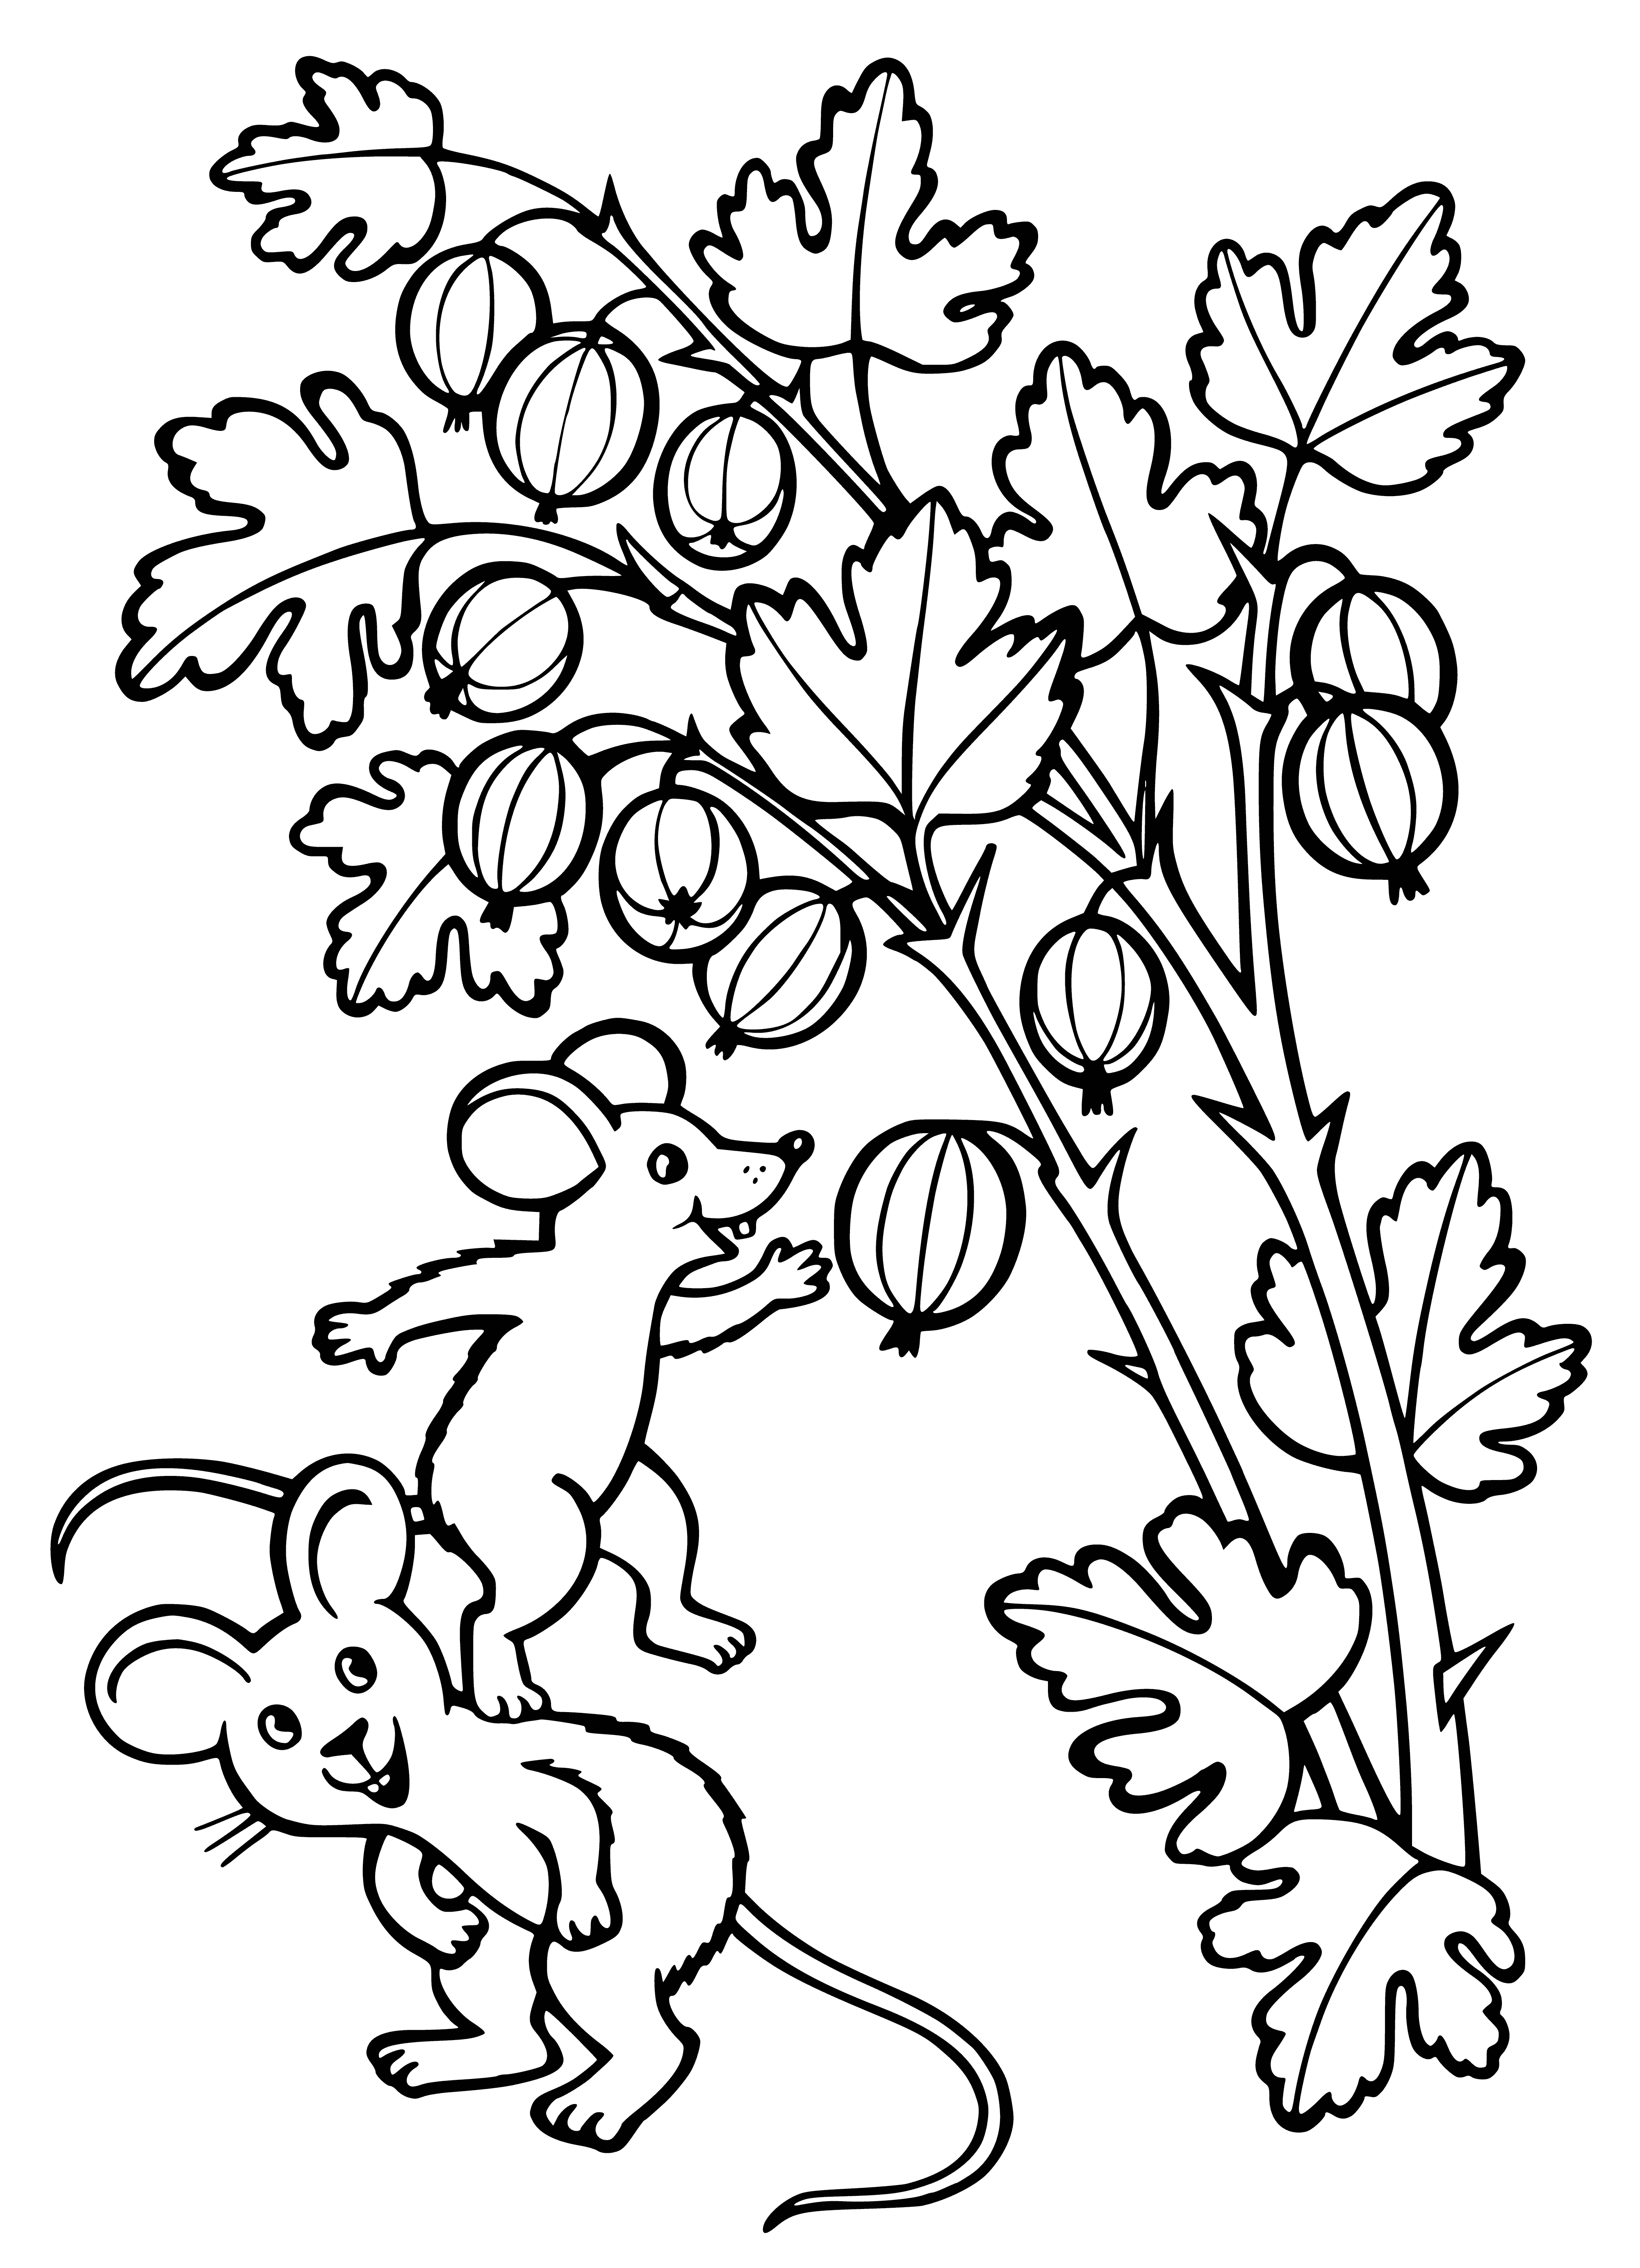 Gooseberry coloring page